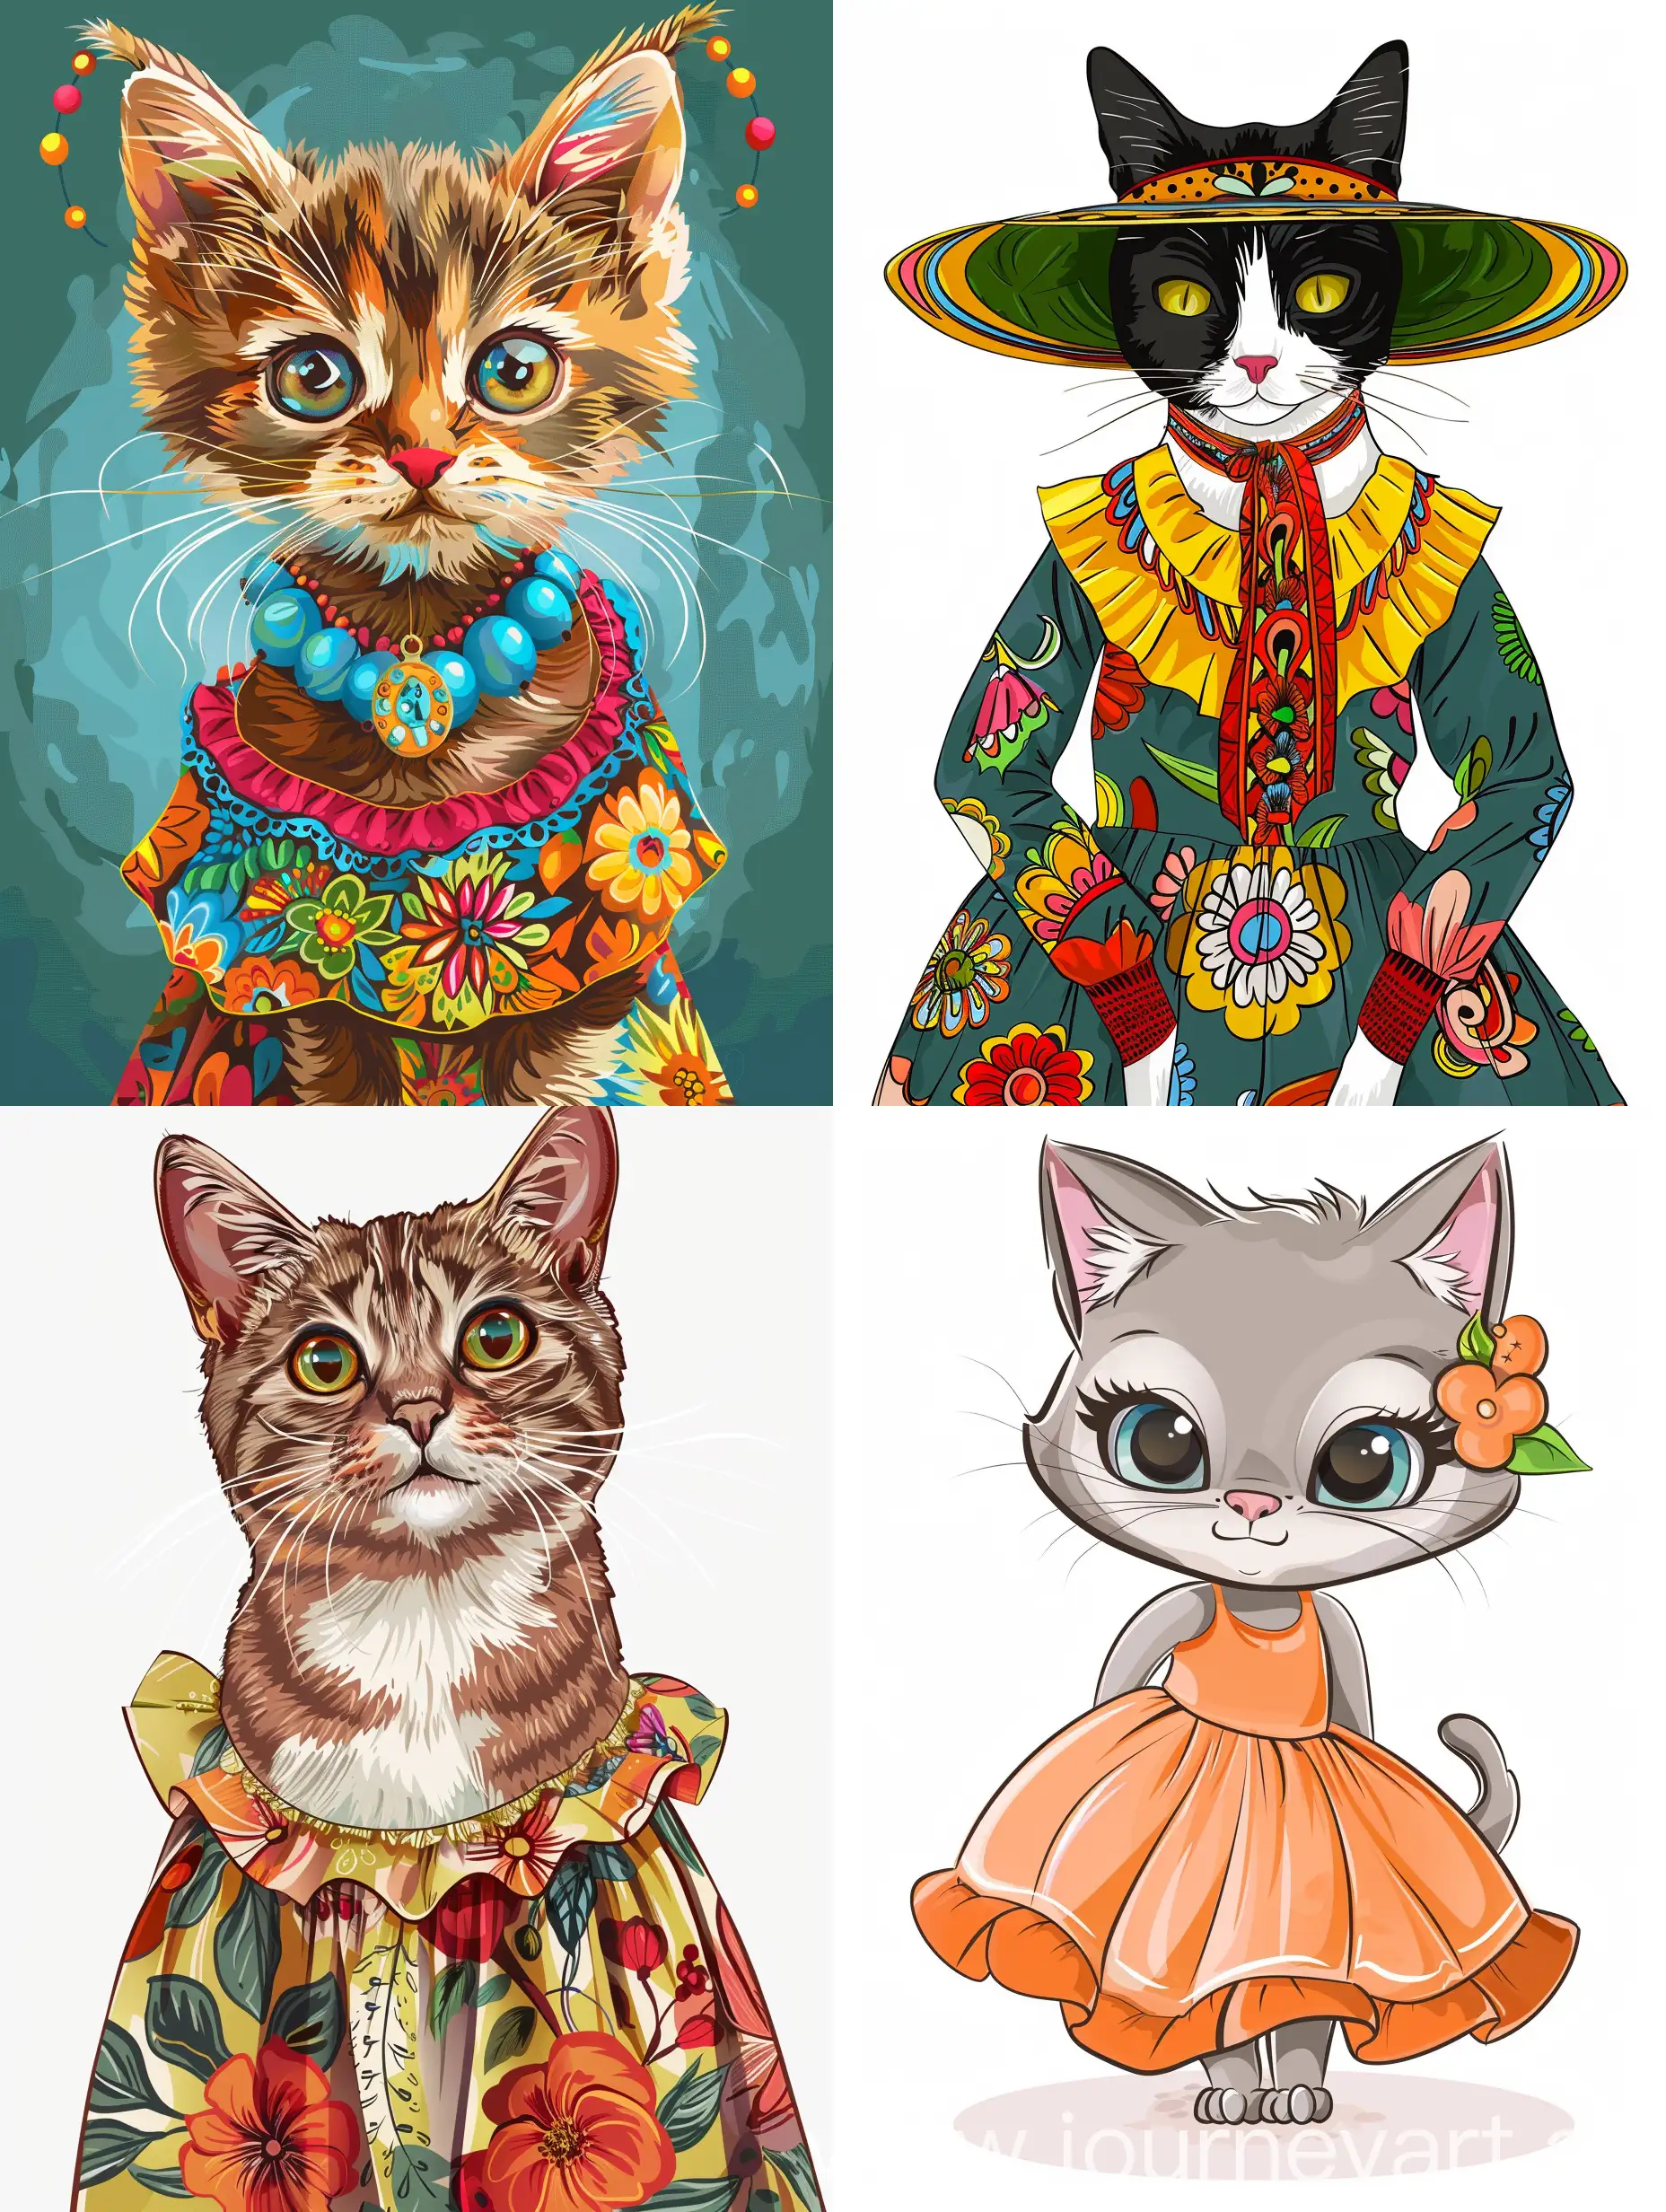 Cartoon-Cat-in-Bright-Dress-Playful-and-Colorful-Artwork